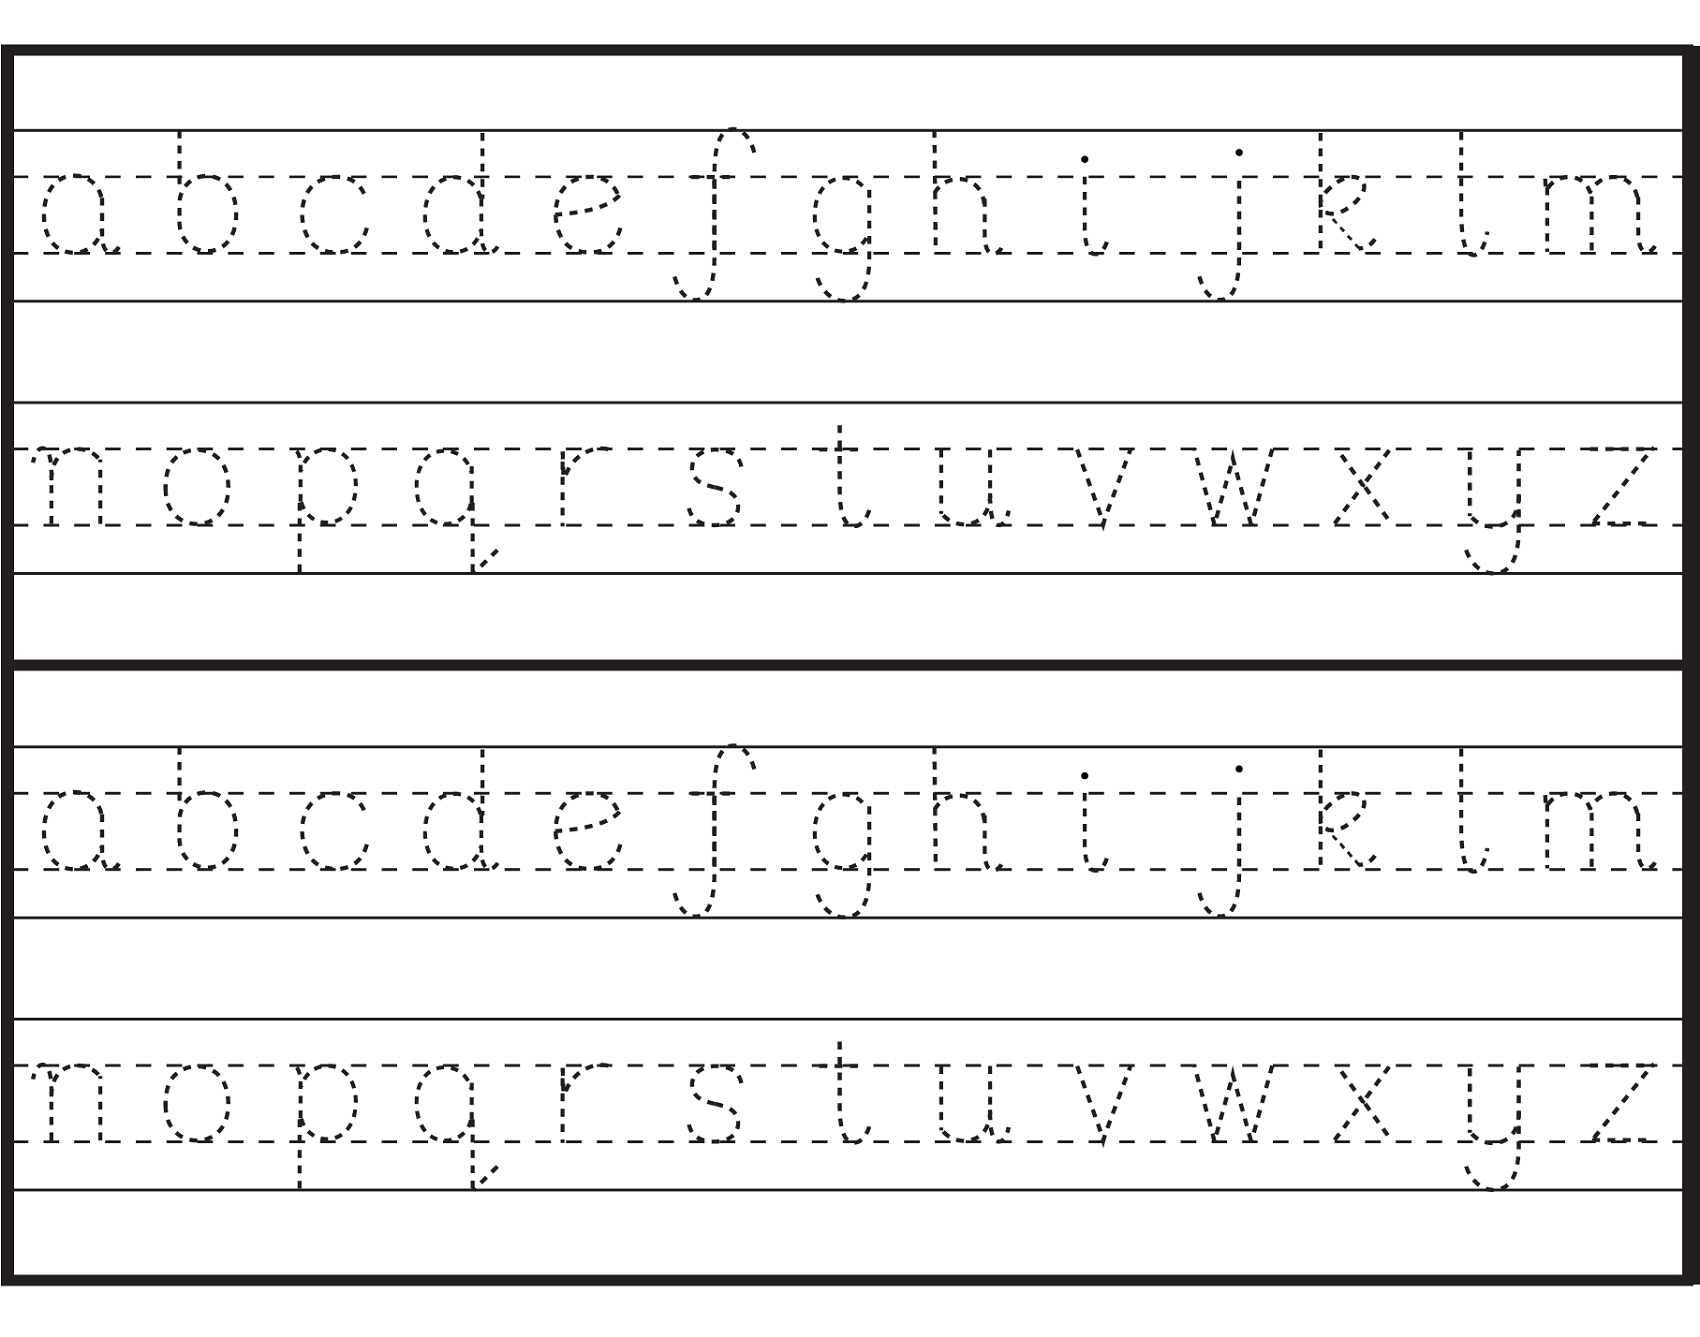 Printable Letters To Trace